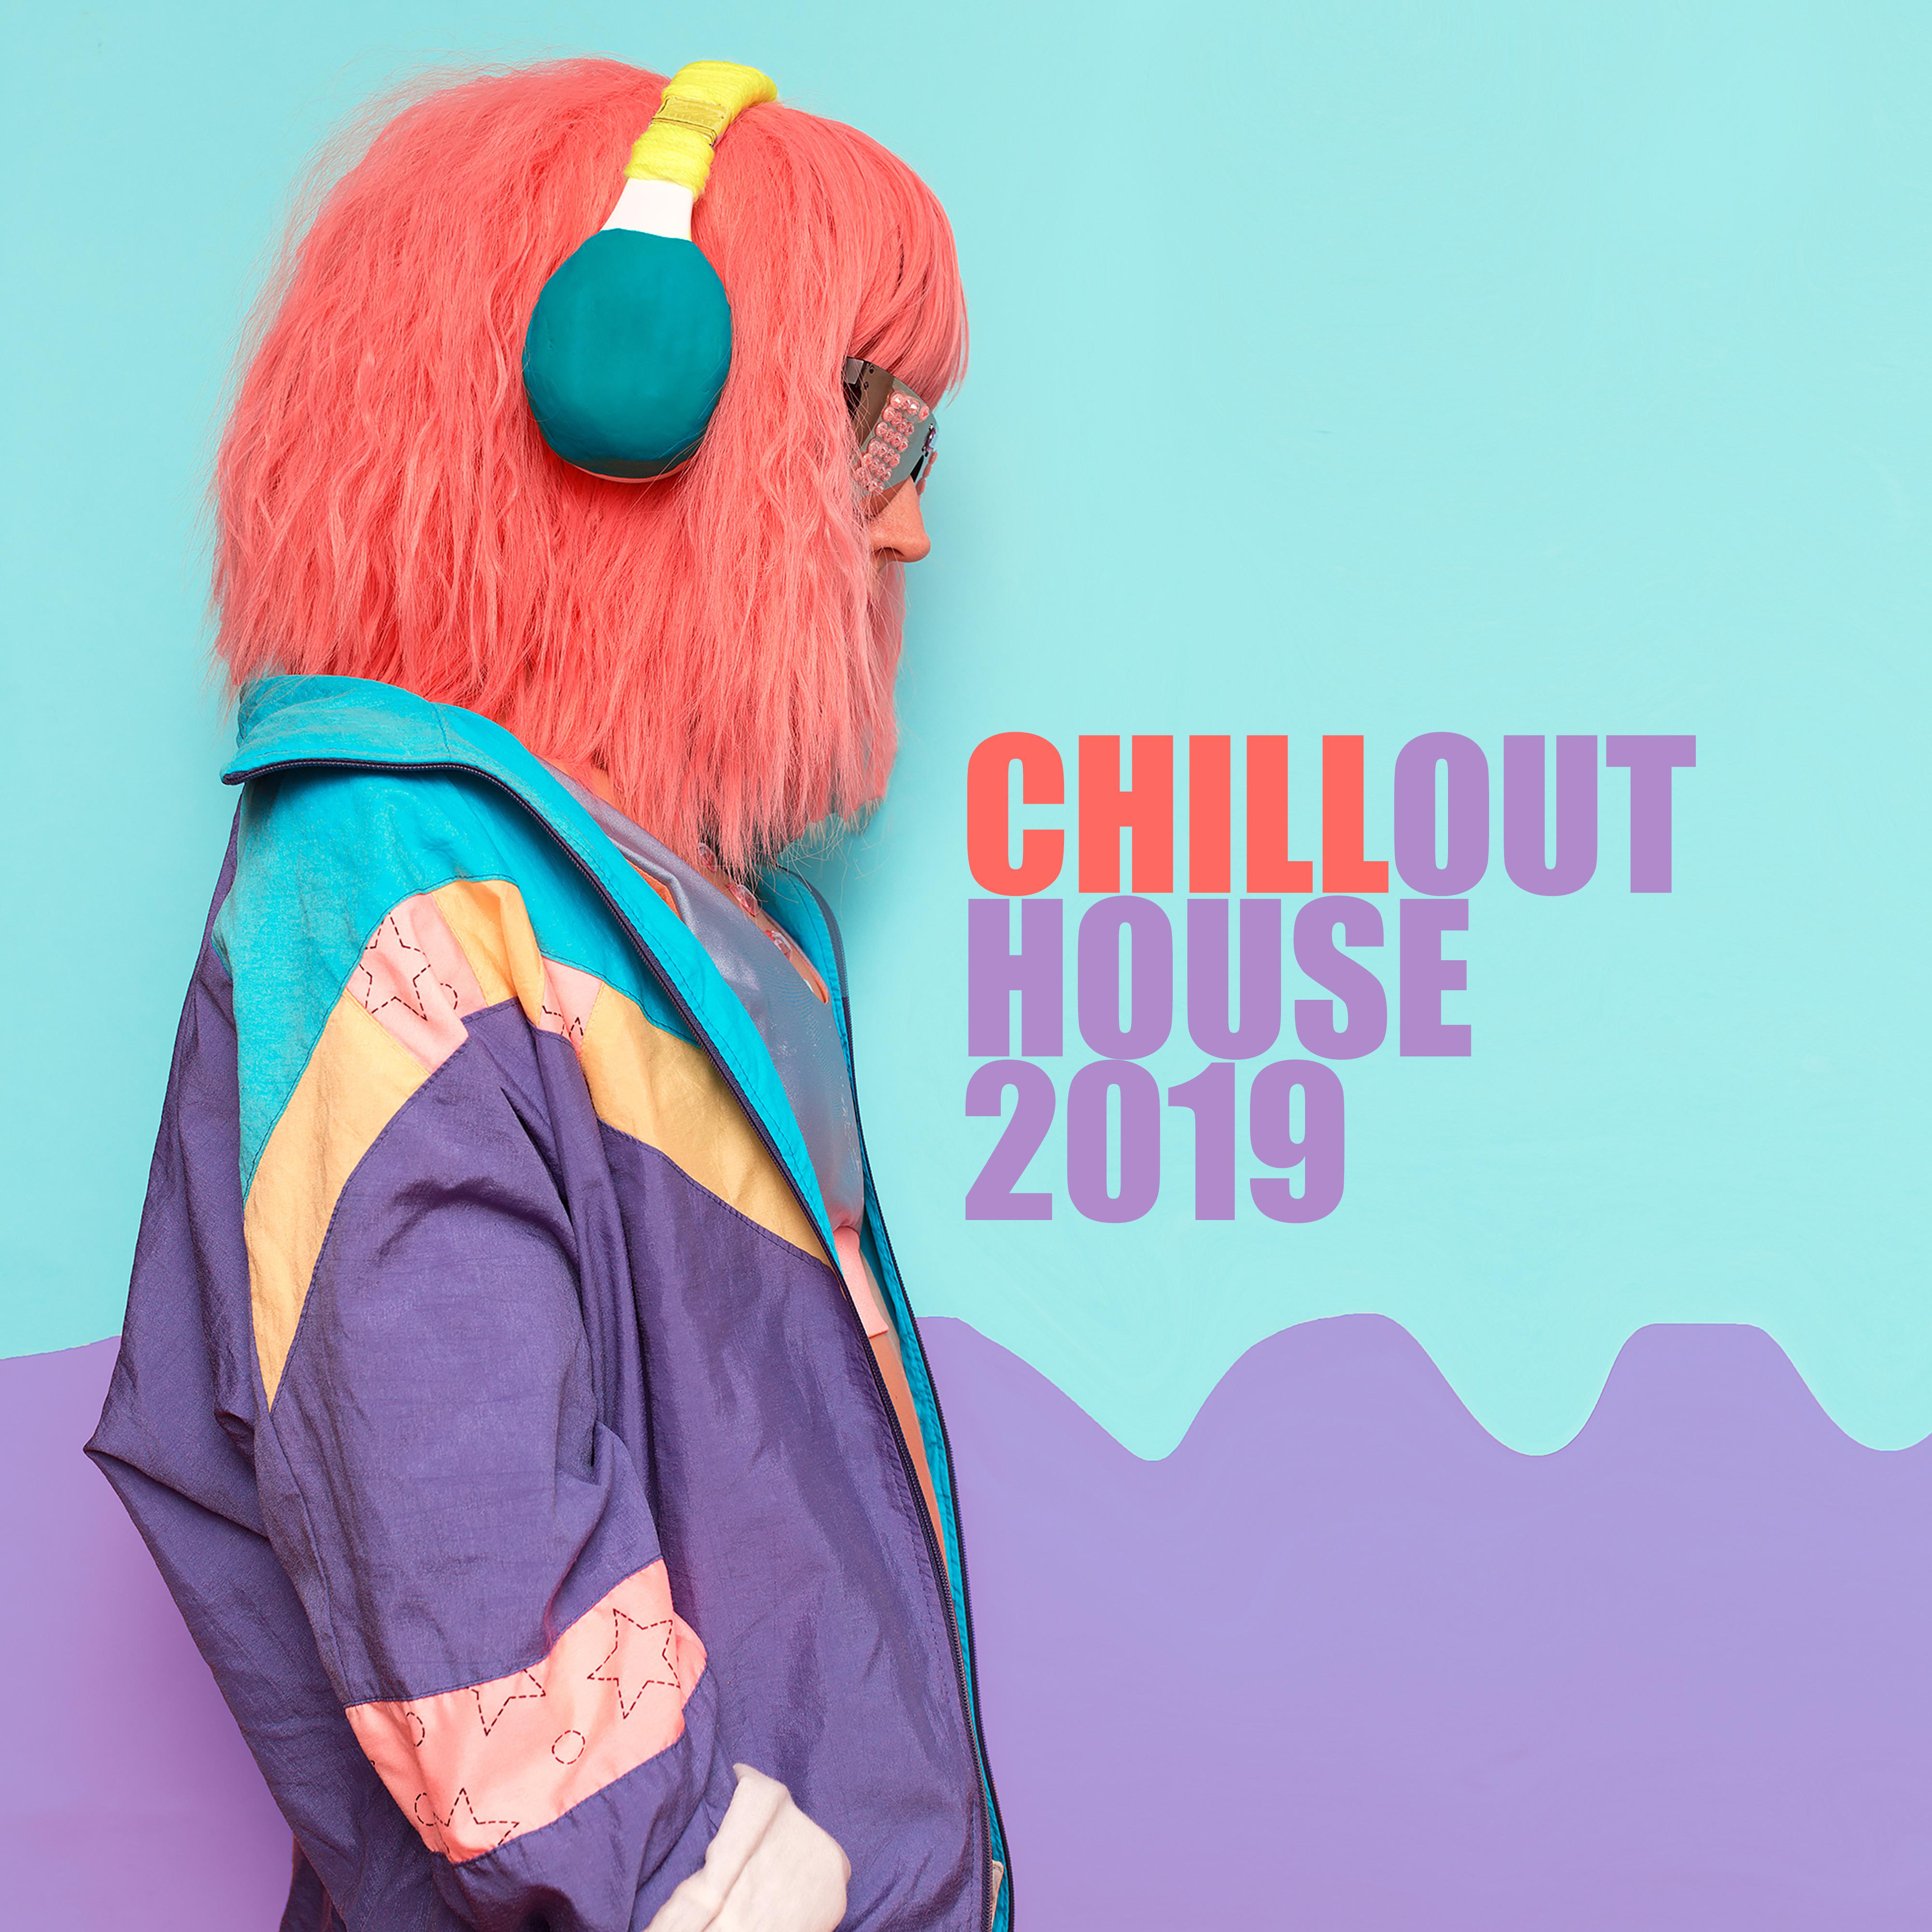 Chillout House 2019